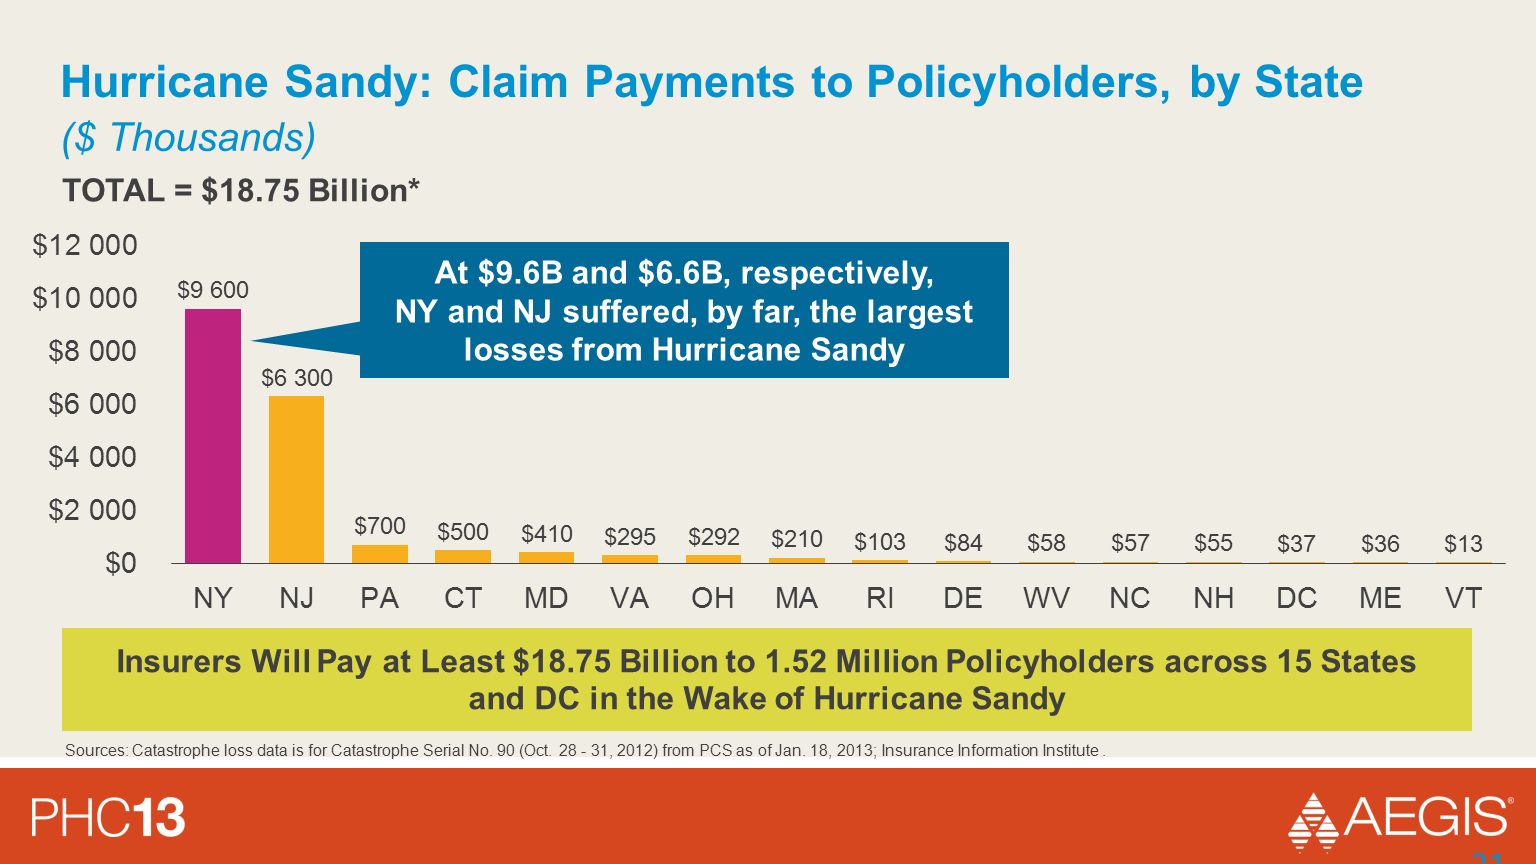 Hurricane Sandy: Claim Payments to Policyholders, by State 21 Insurers Will Pay at Least $18.75 Billion to 1.52 Million Policyholders across 15 States and DC in the Wake of Hurricane Sandy At $9.6B and $6.6B, respectively, NY and NJ suffered, by far, the largest losses from Hurricane Sandy TOTAL = $18.75 Billion* ($ Thousands) Sources: Catastrophe loss data is for Catastrophe Serial No.